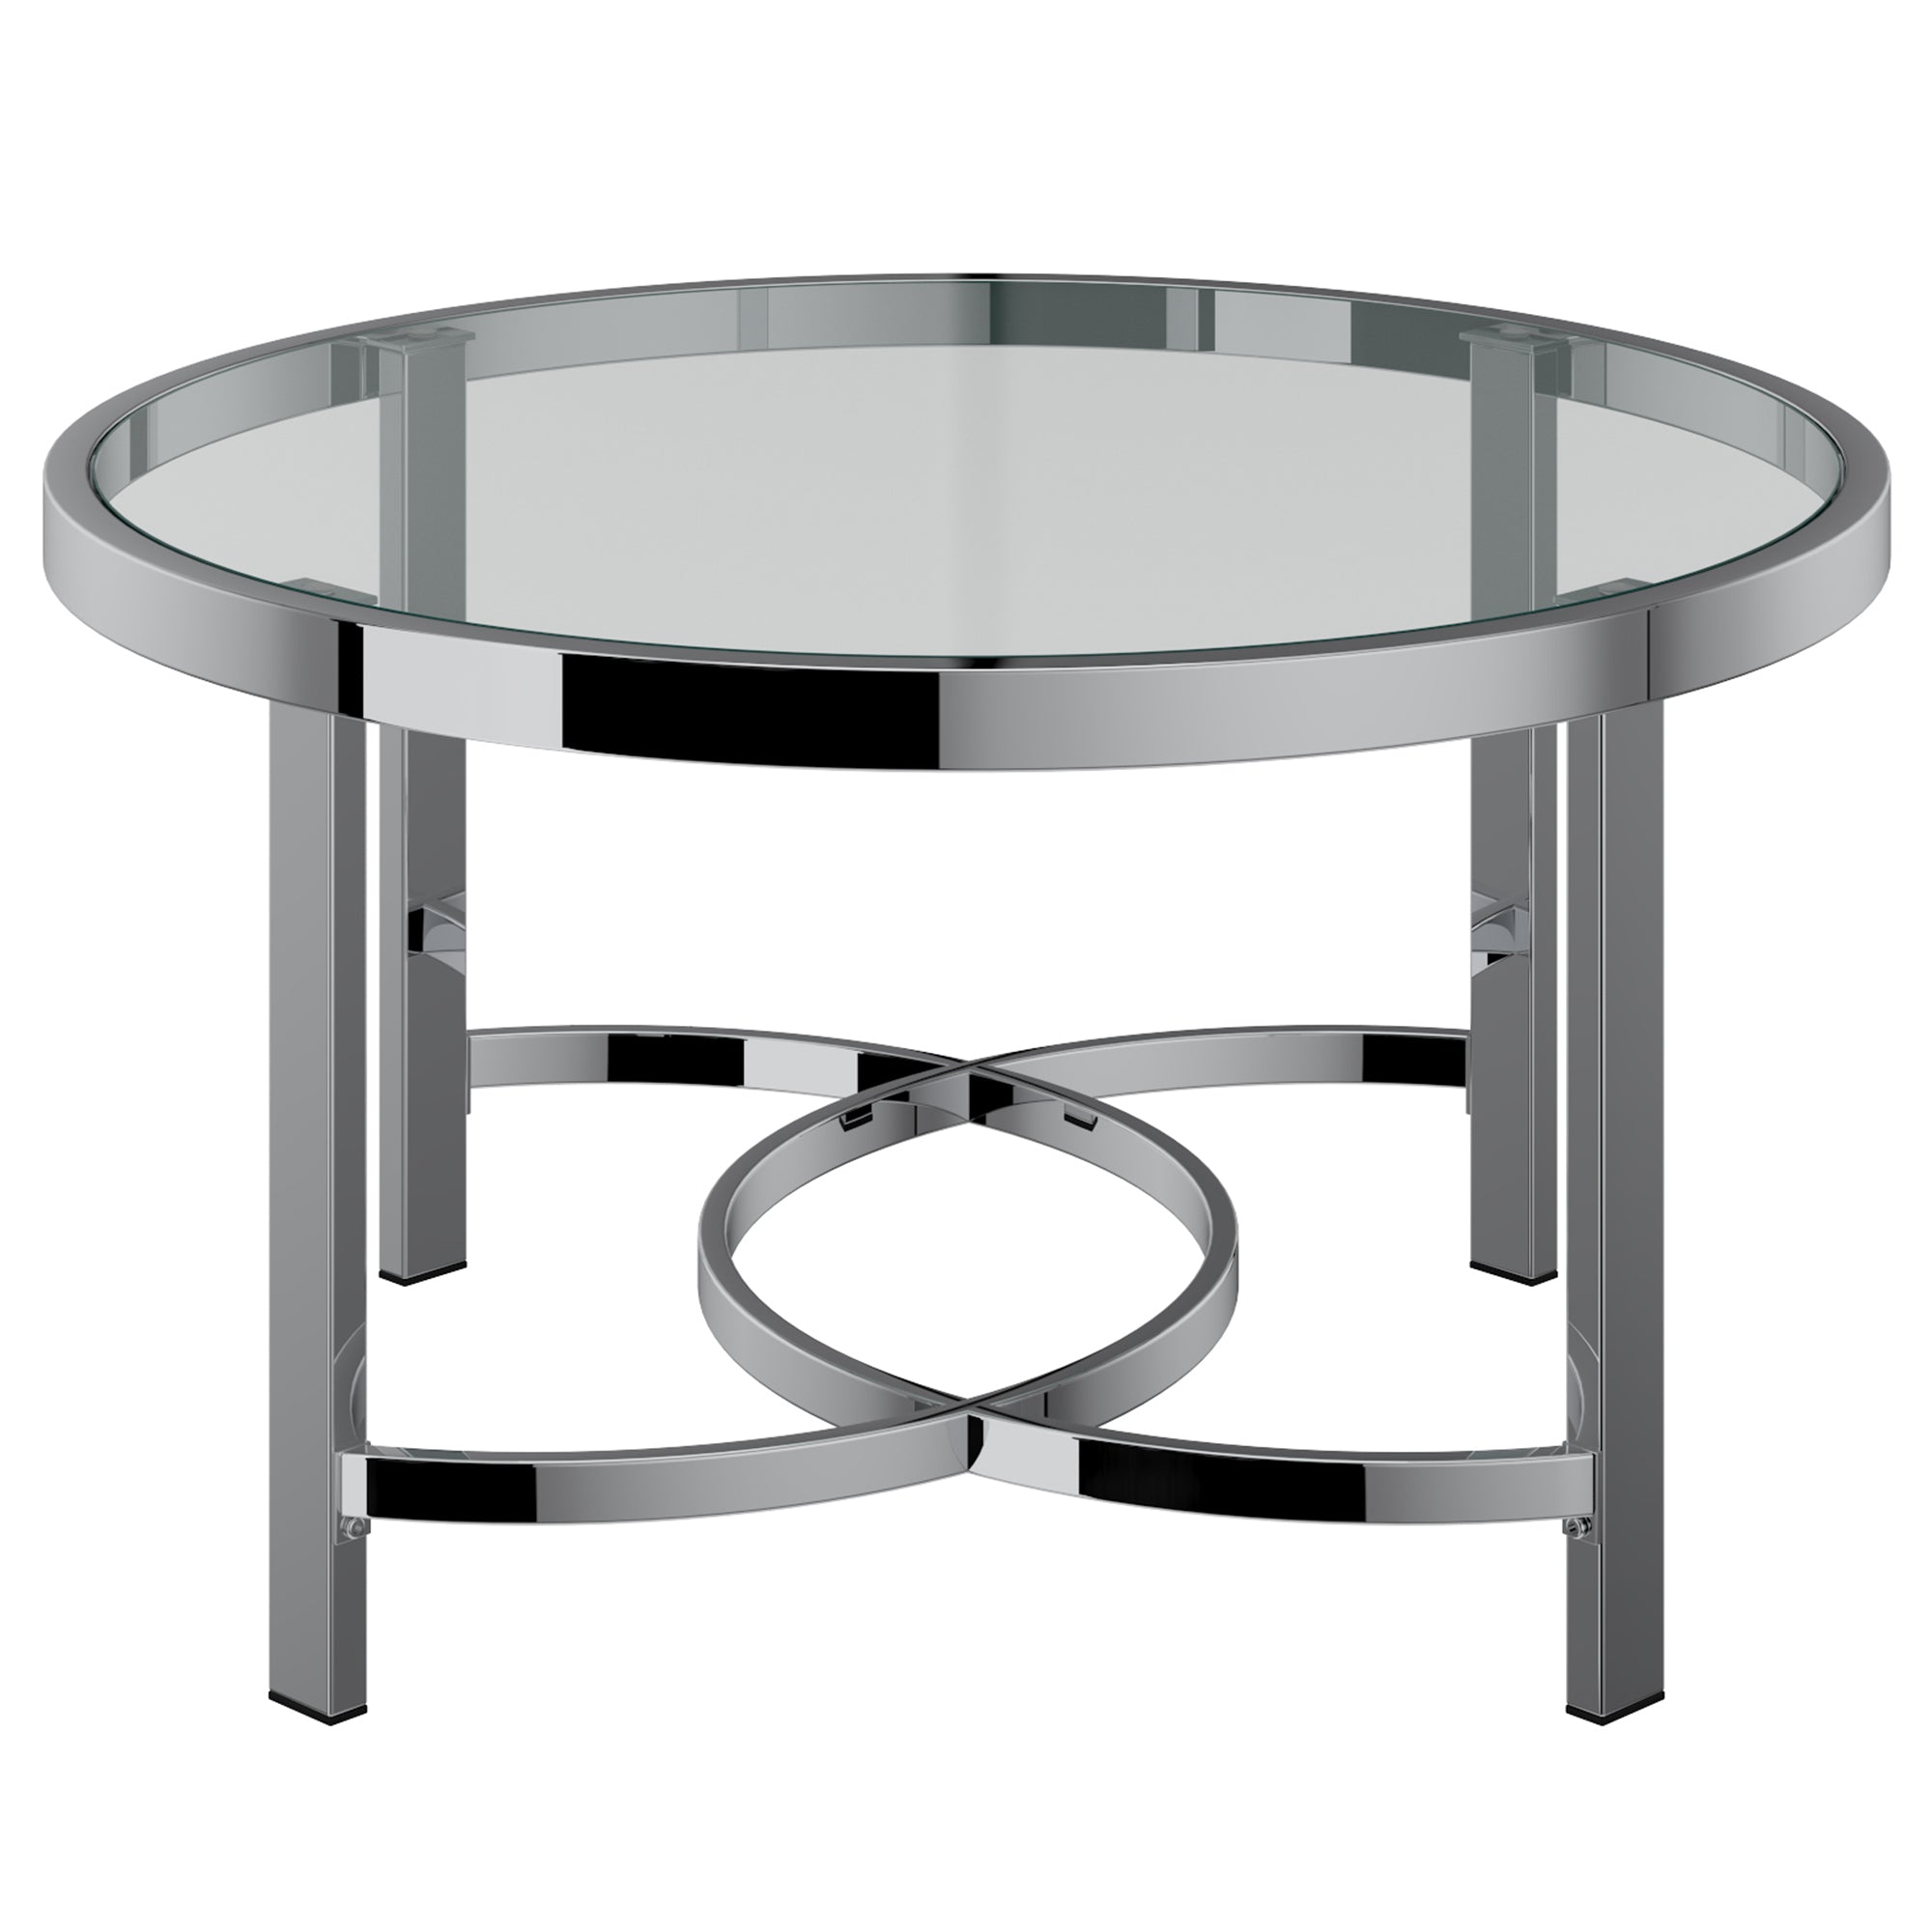 Strata Coffee Table in Chrome